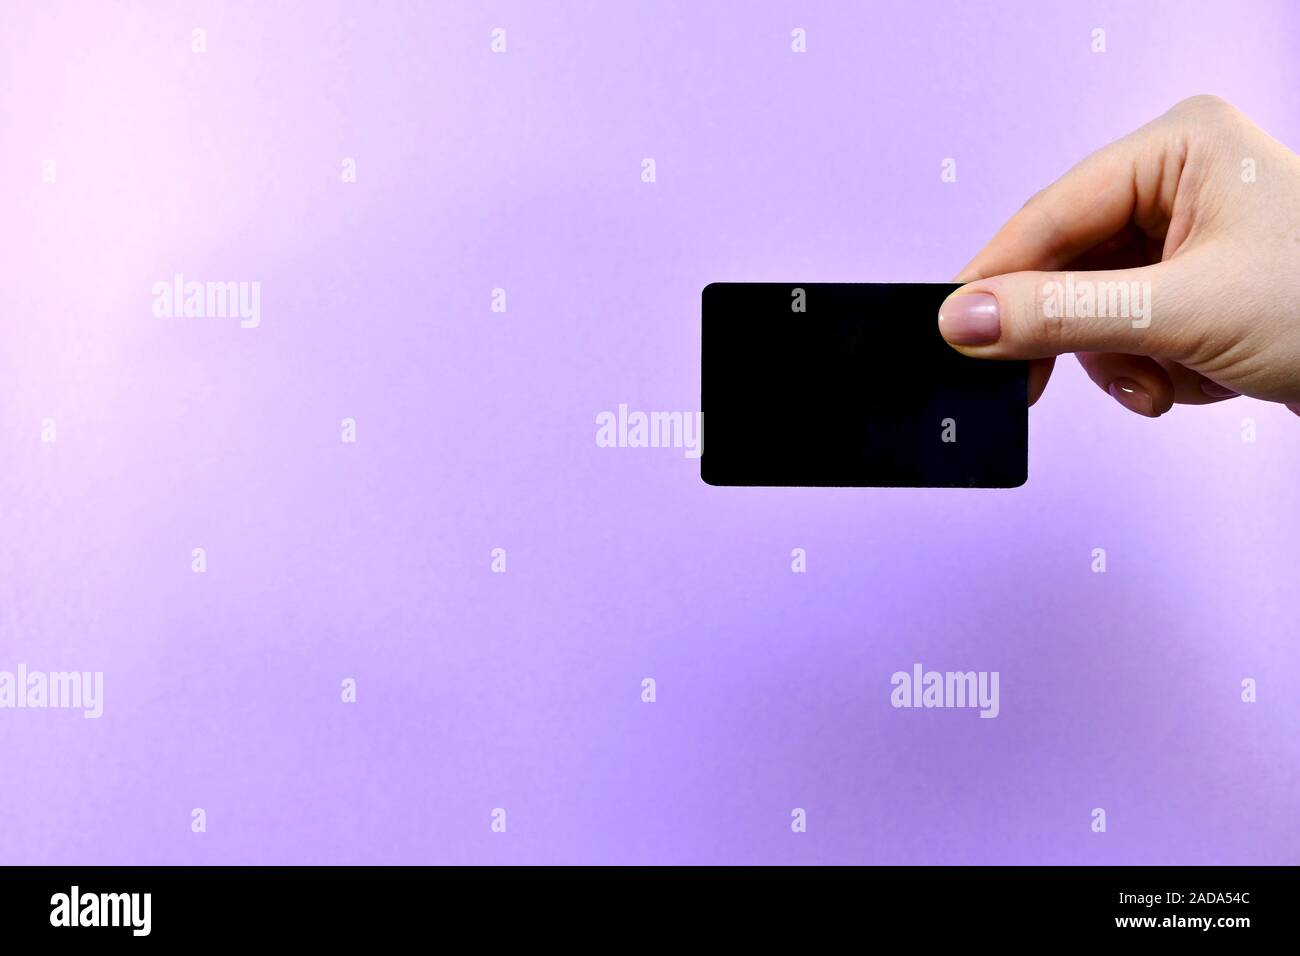 Demonstration of a black card in a hand on a purple background. Stock Photo